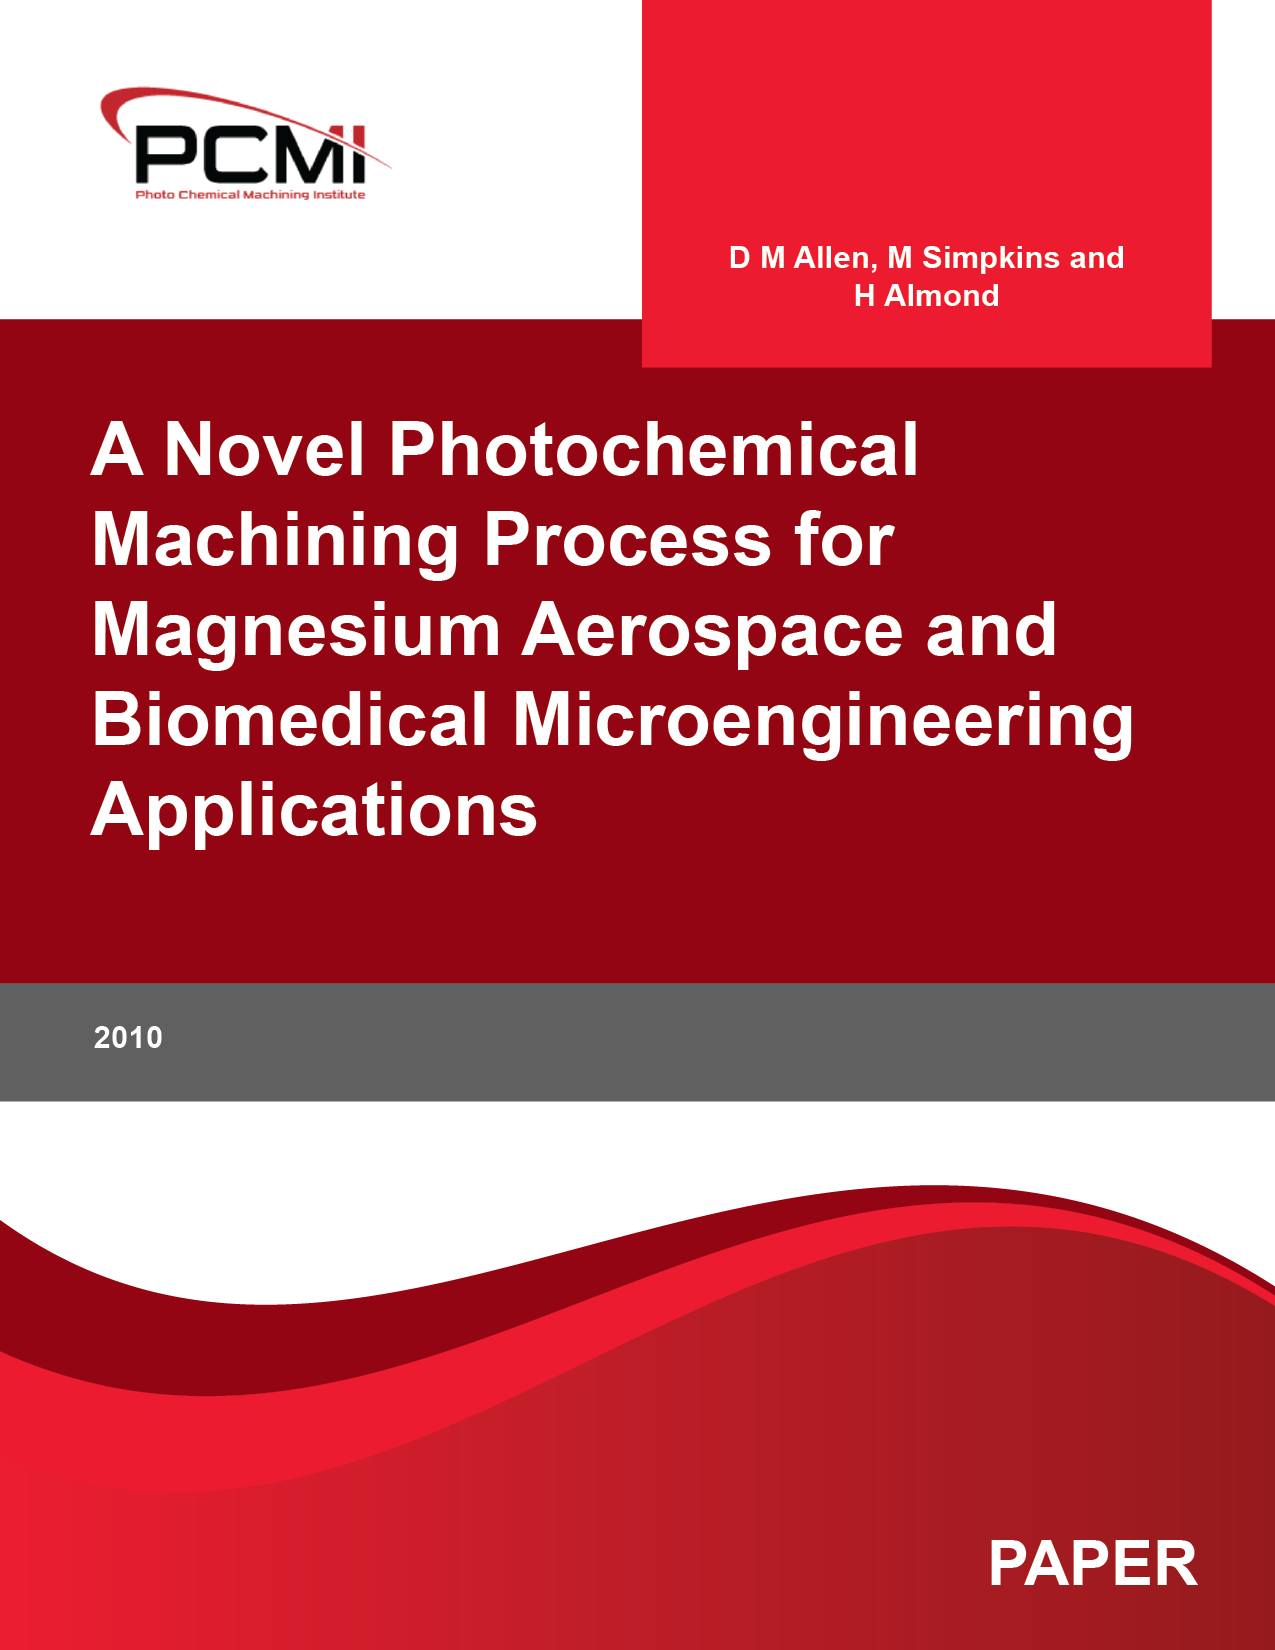 A Novel Photochemical Machining Process for Magnesium Aerospace and Biomedical Microengineering Applications